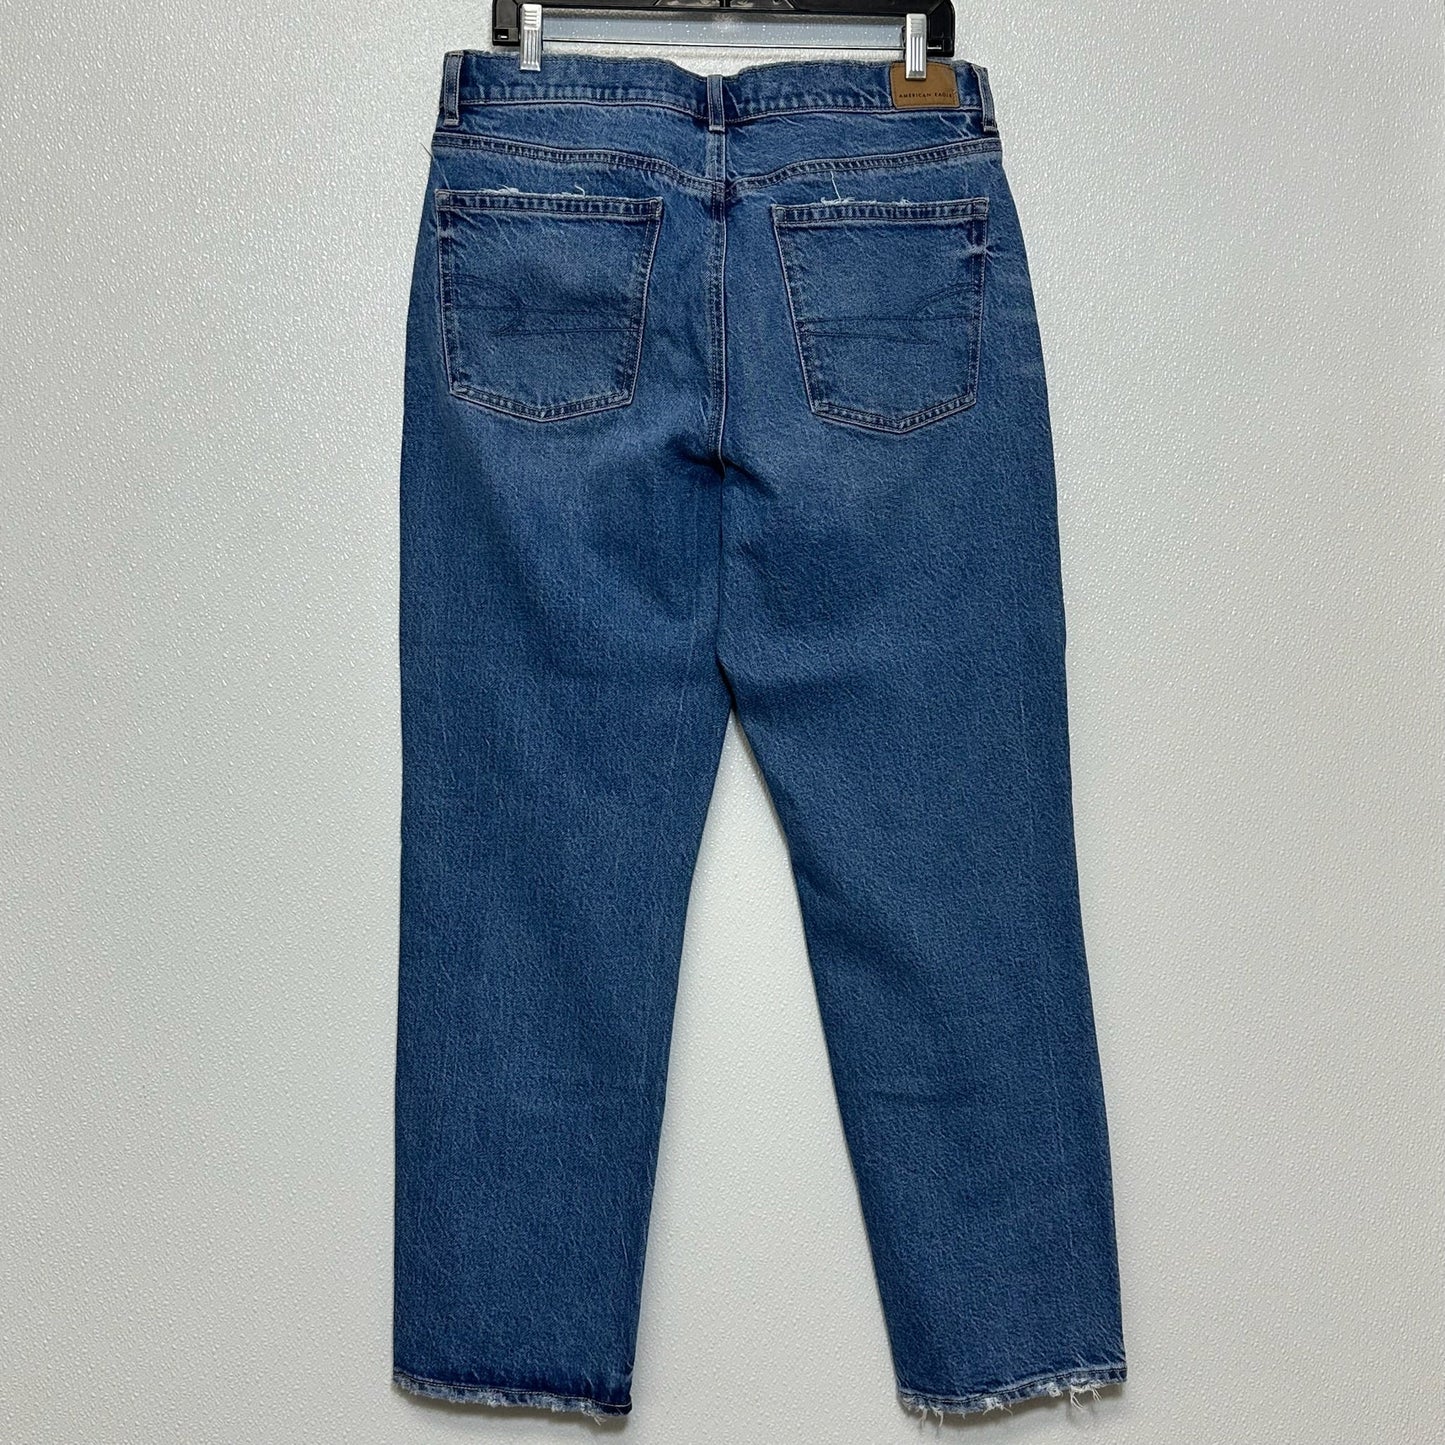 Jeans Relaxed/boyfriend By American Eagle  Size: 12